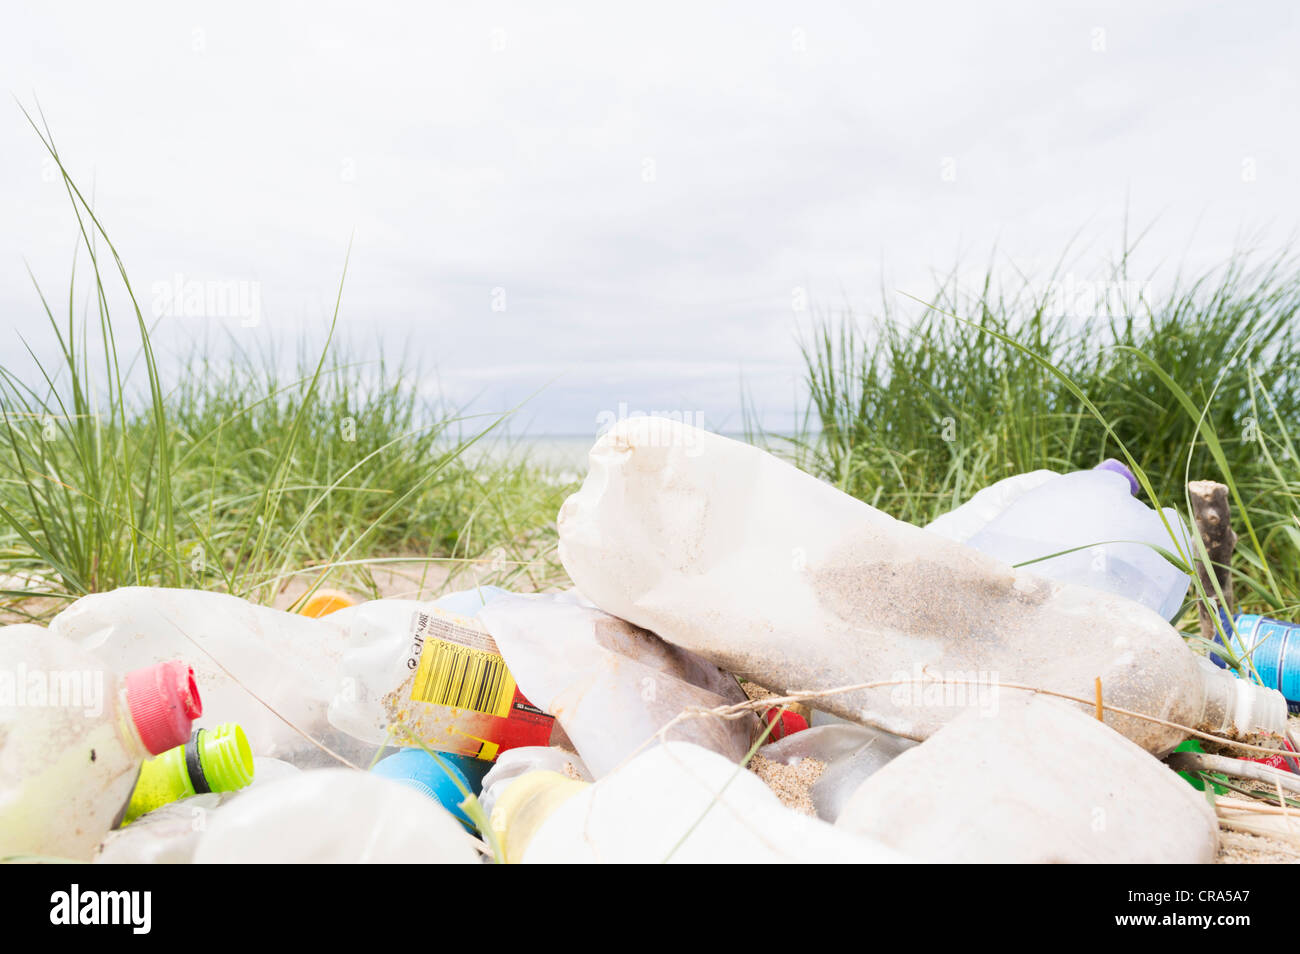 plastic bottles and other rubbish washed up by the tide on a beach Stock Photo